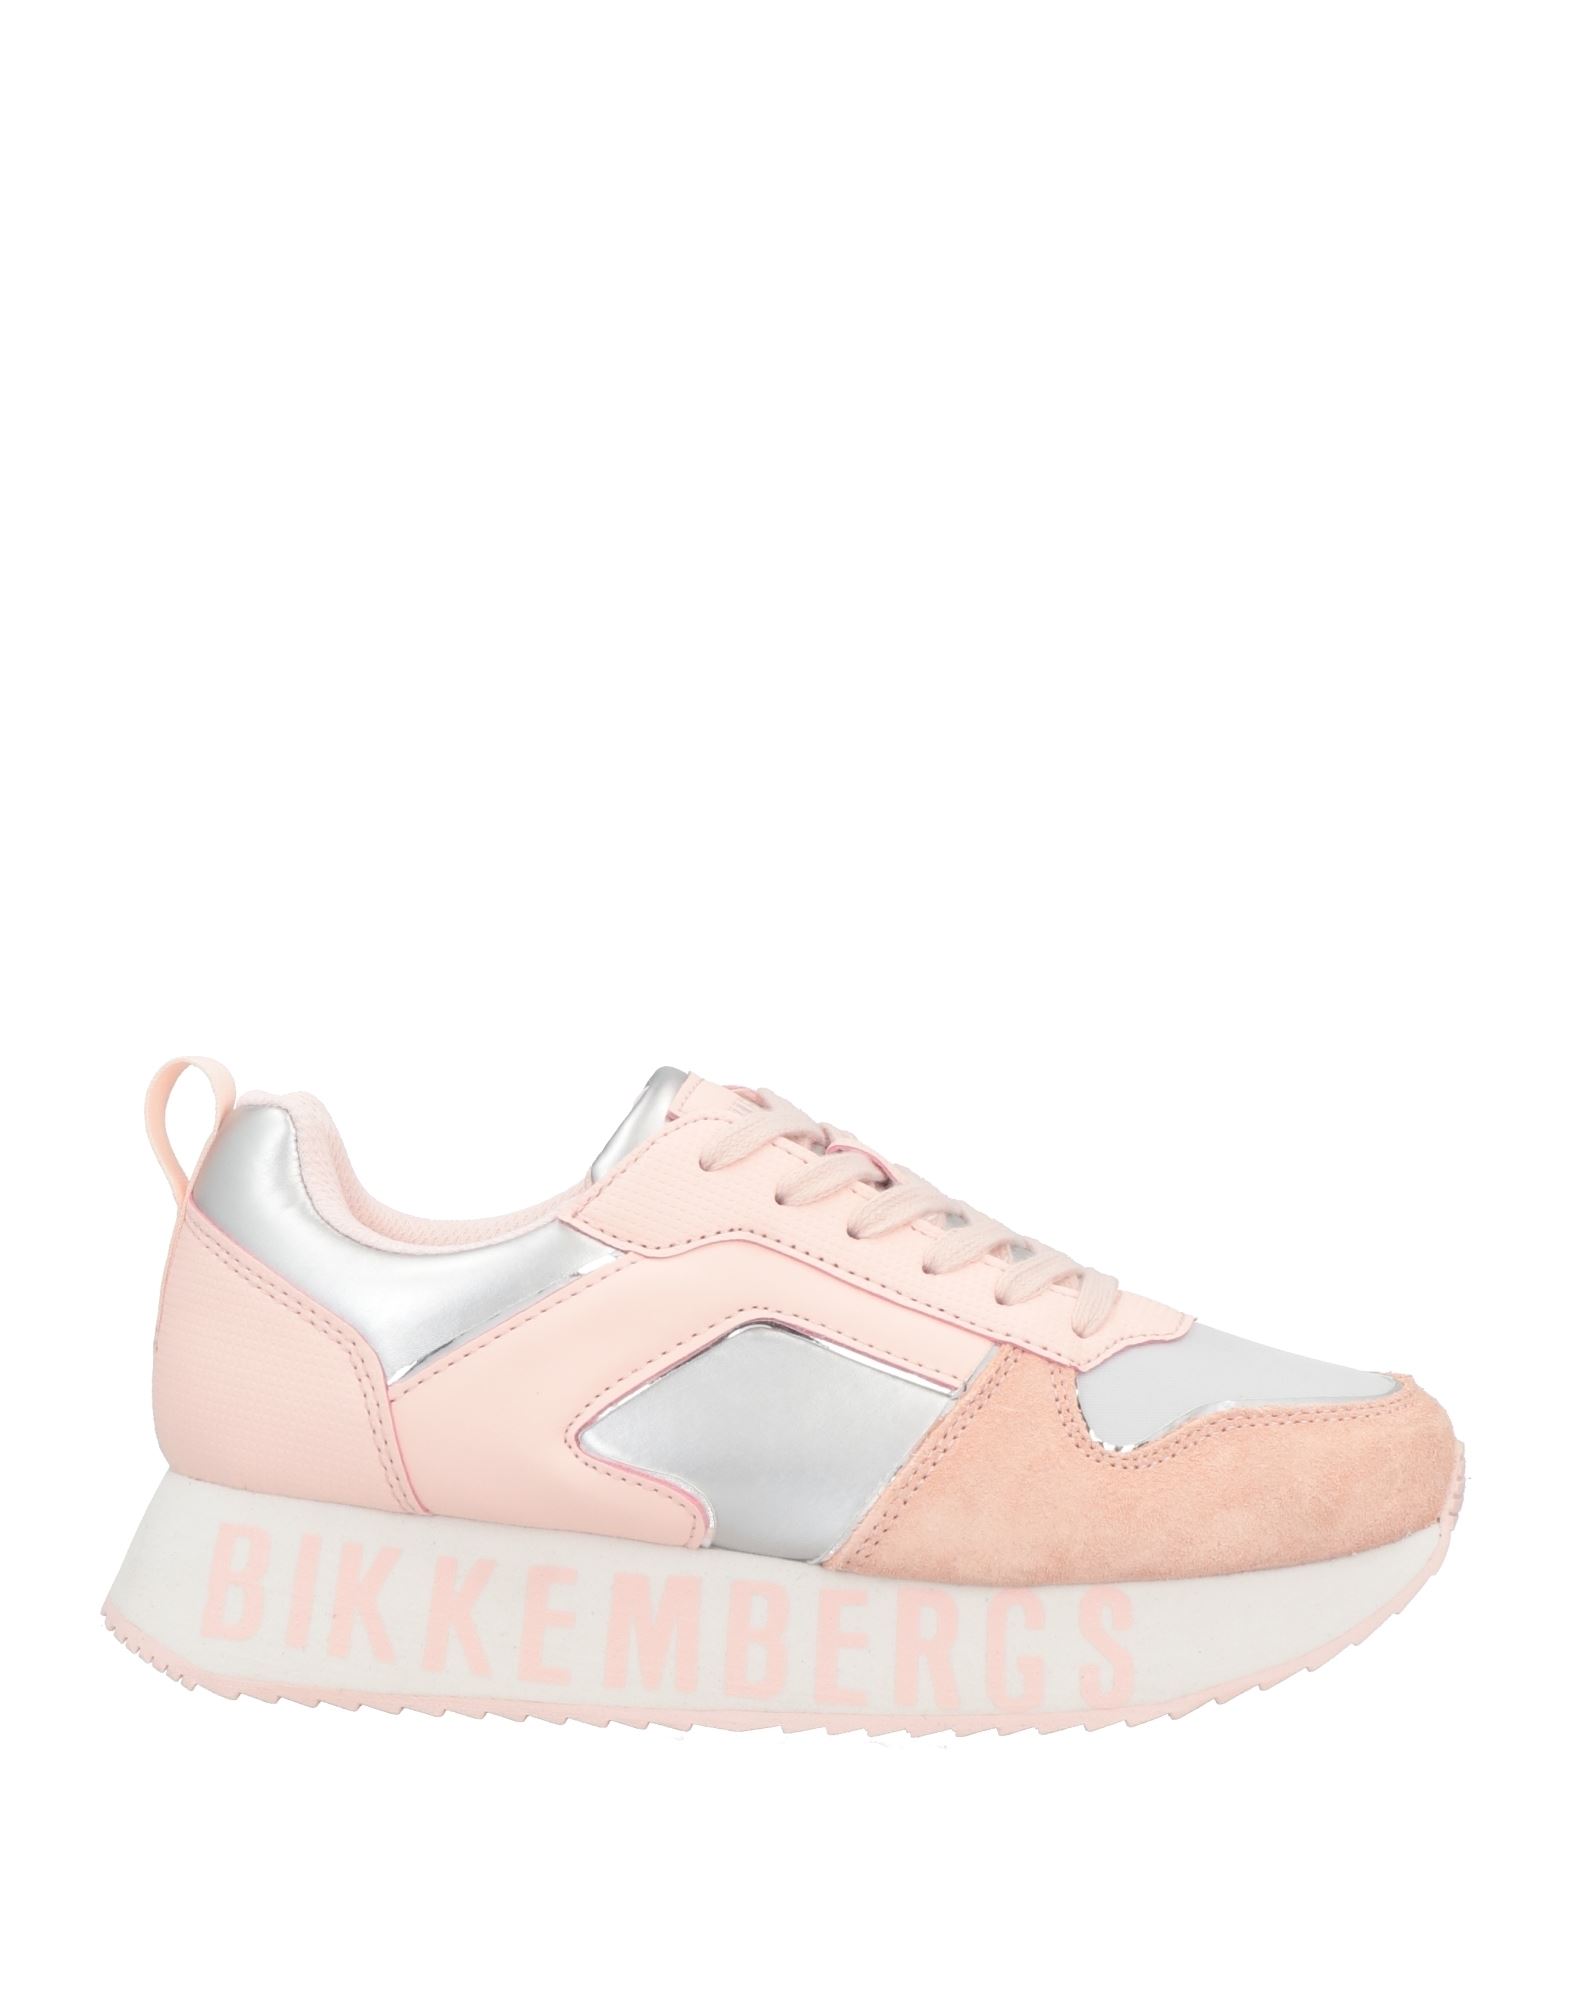 Shop Bikkembergs Woman Sneakers Pink Size 7.5 Soft Leather, Textile Fibers